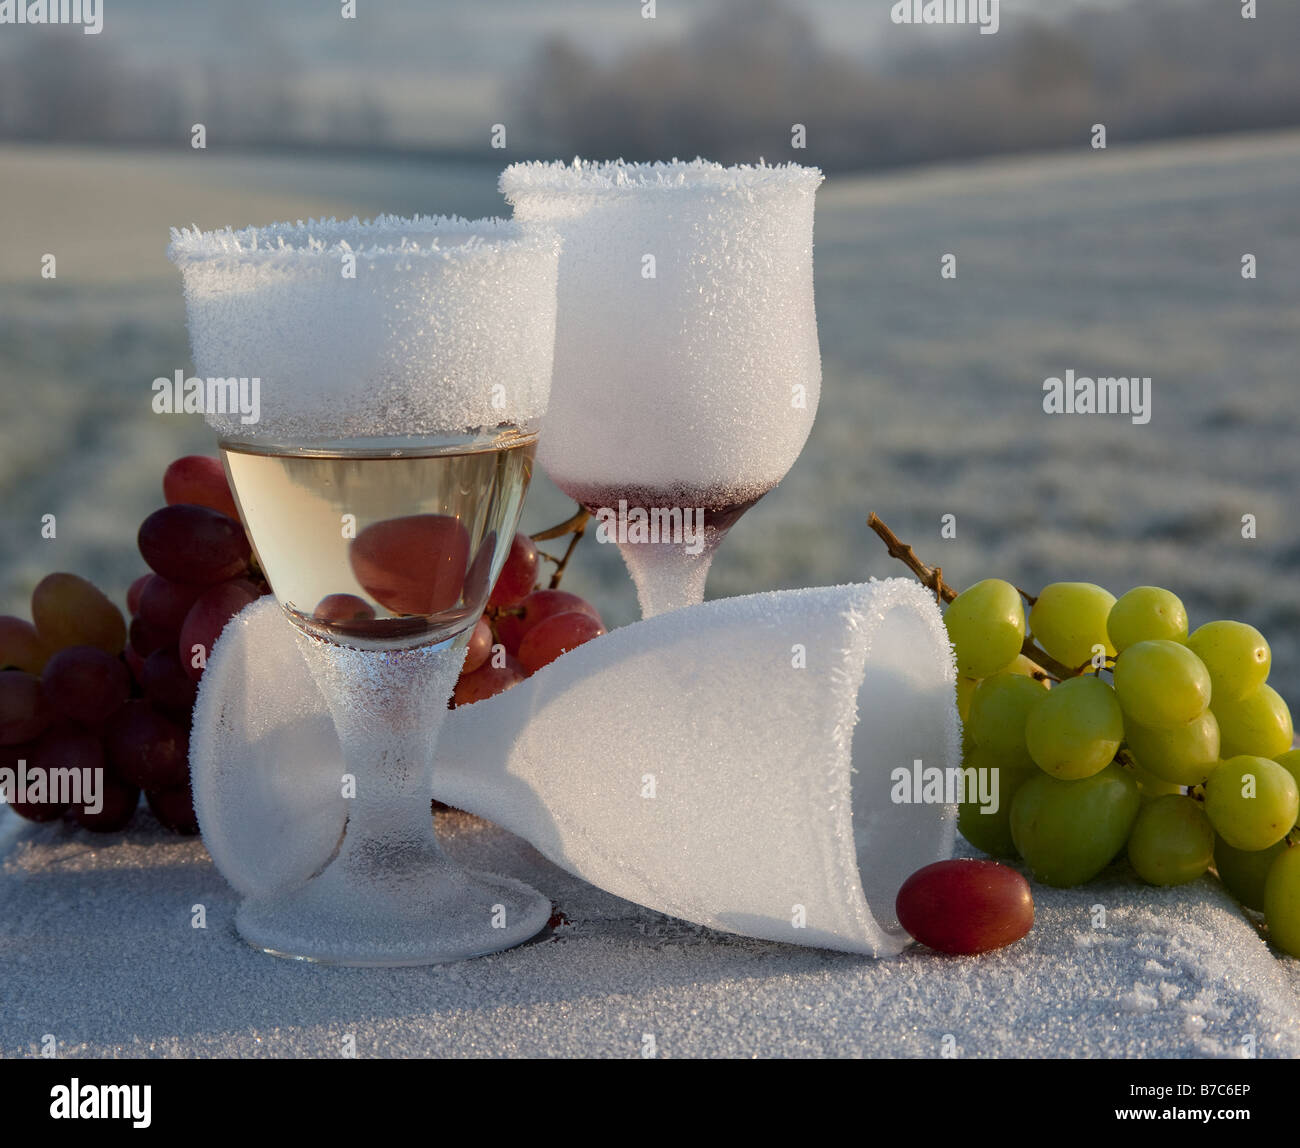 Morning-after-night-before frosted and broken wine glass party remains in  frozen countryside UK Stock Photo - Alamy